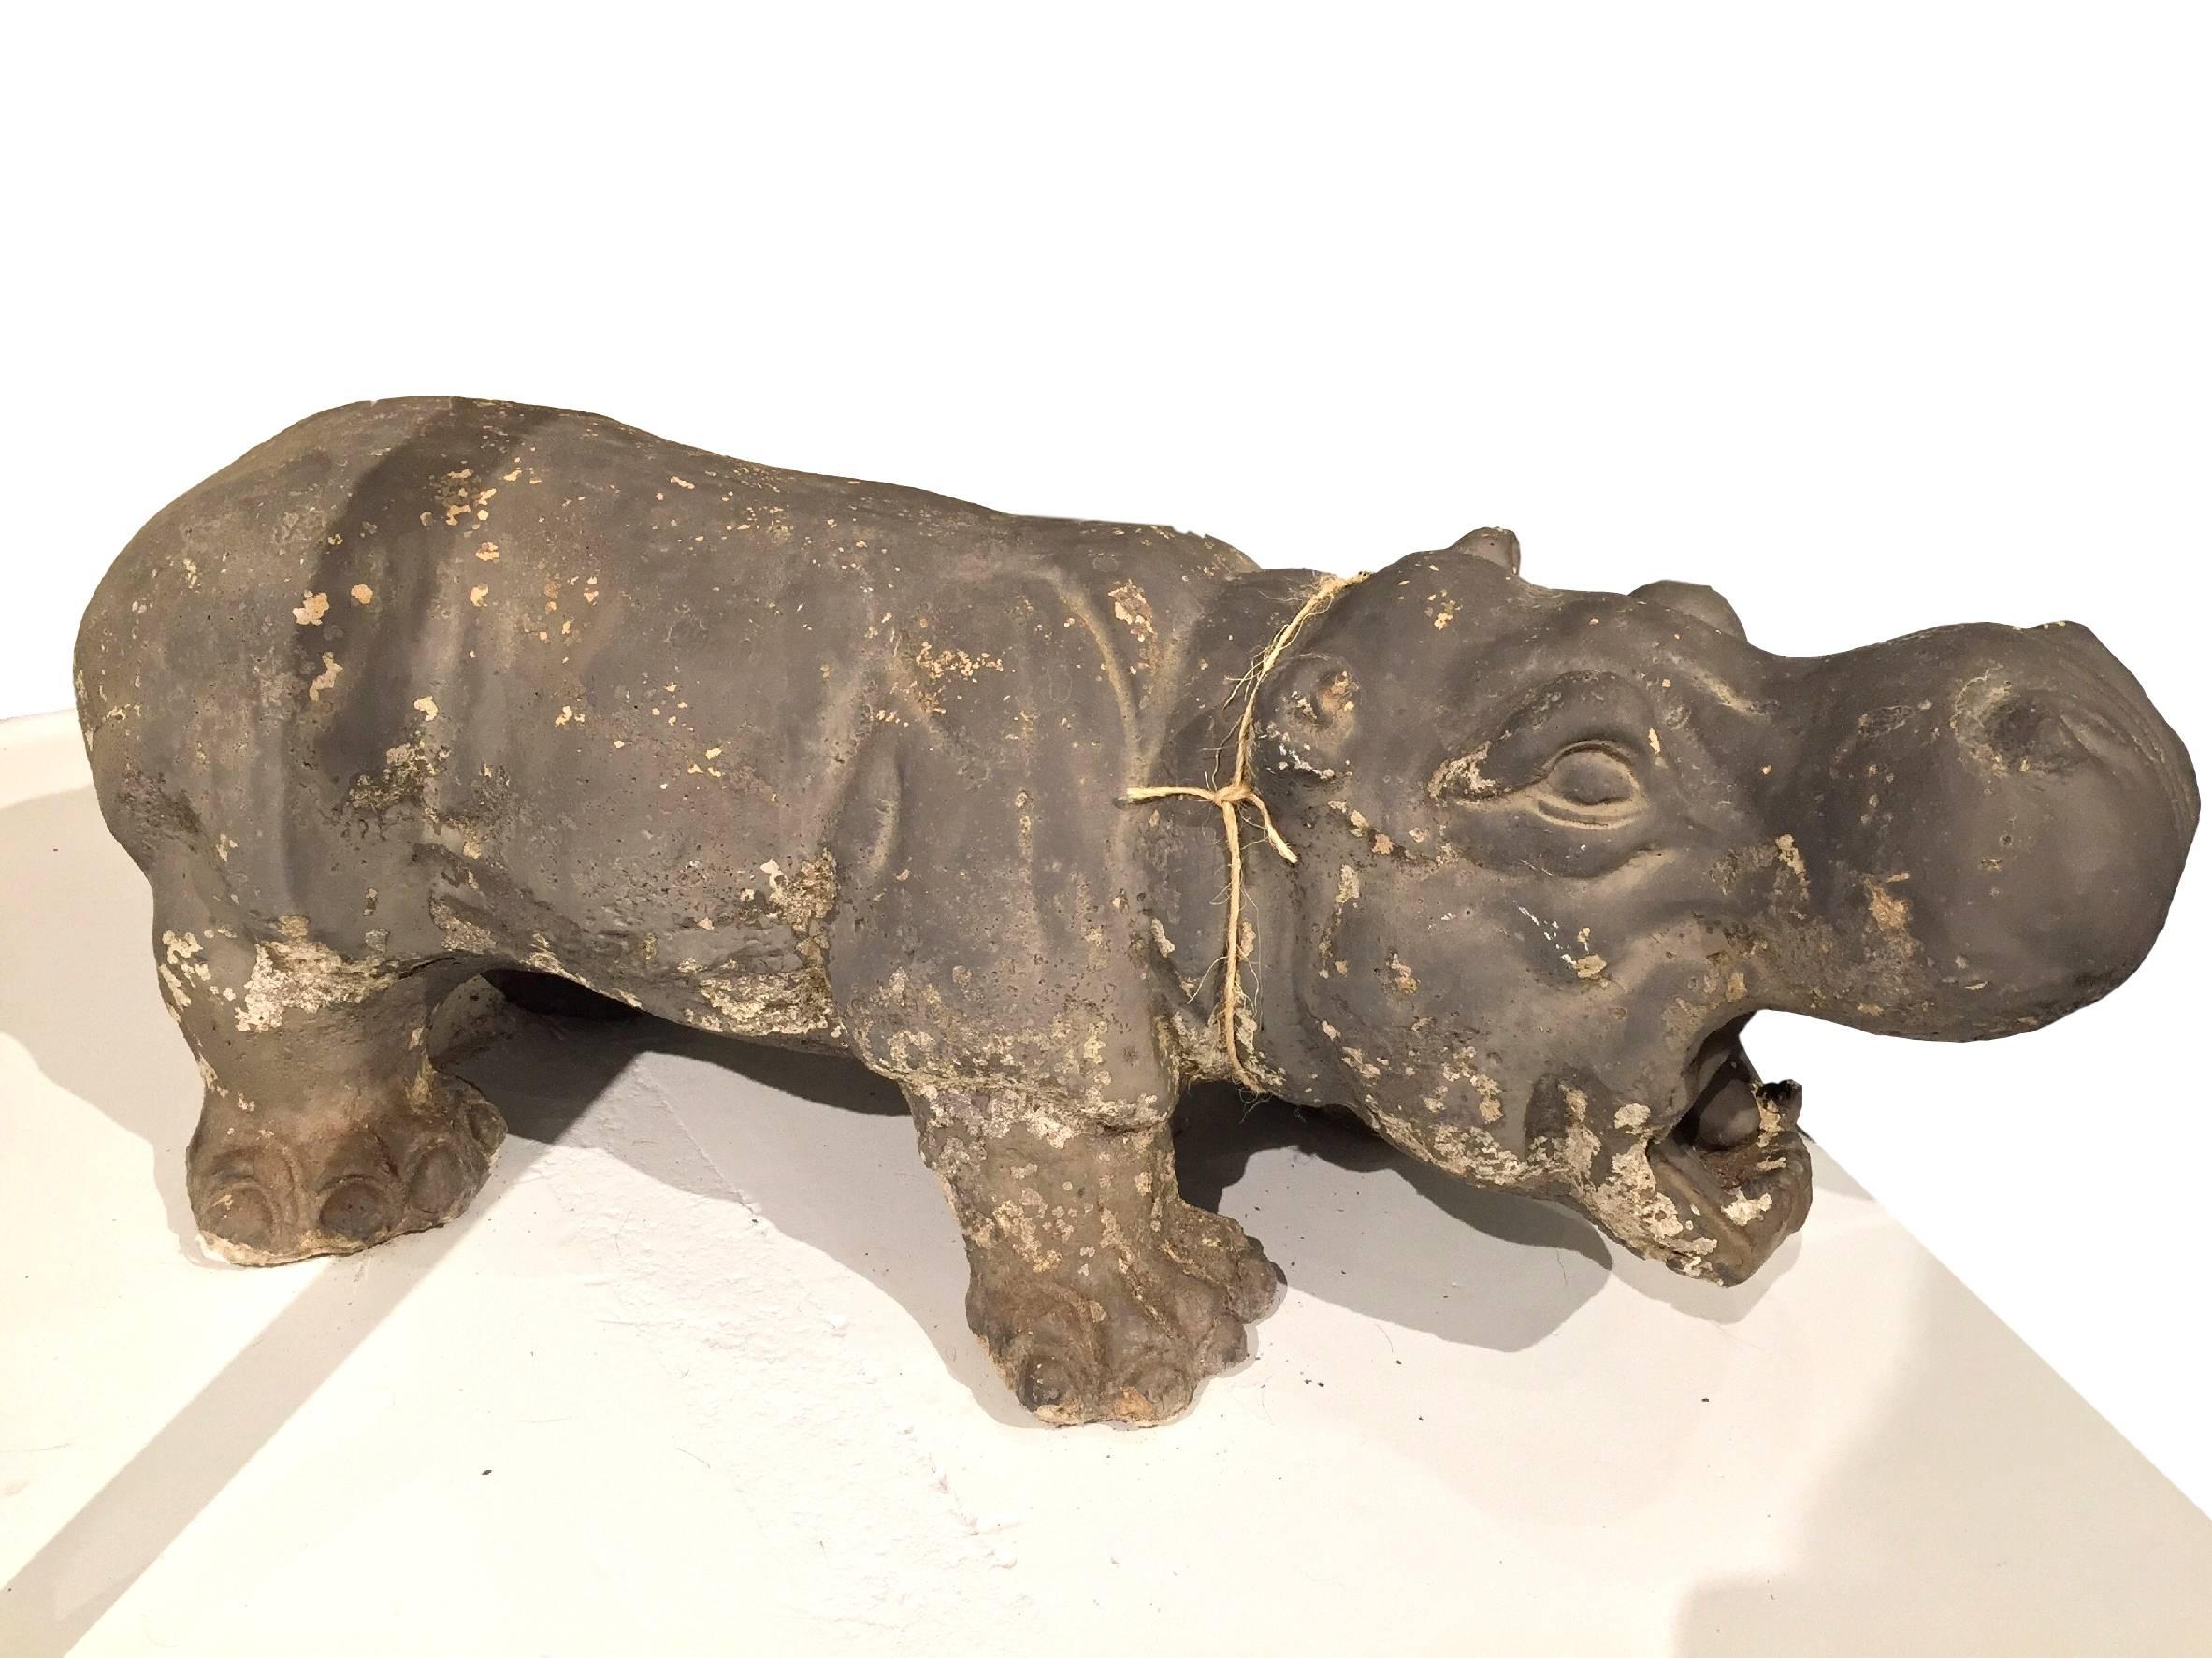 This is a rather heavy cement hippo sculpture, a great art accessory addition.
Weight: 75 lbs